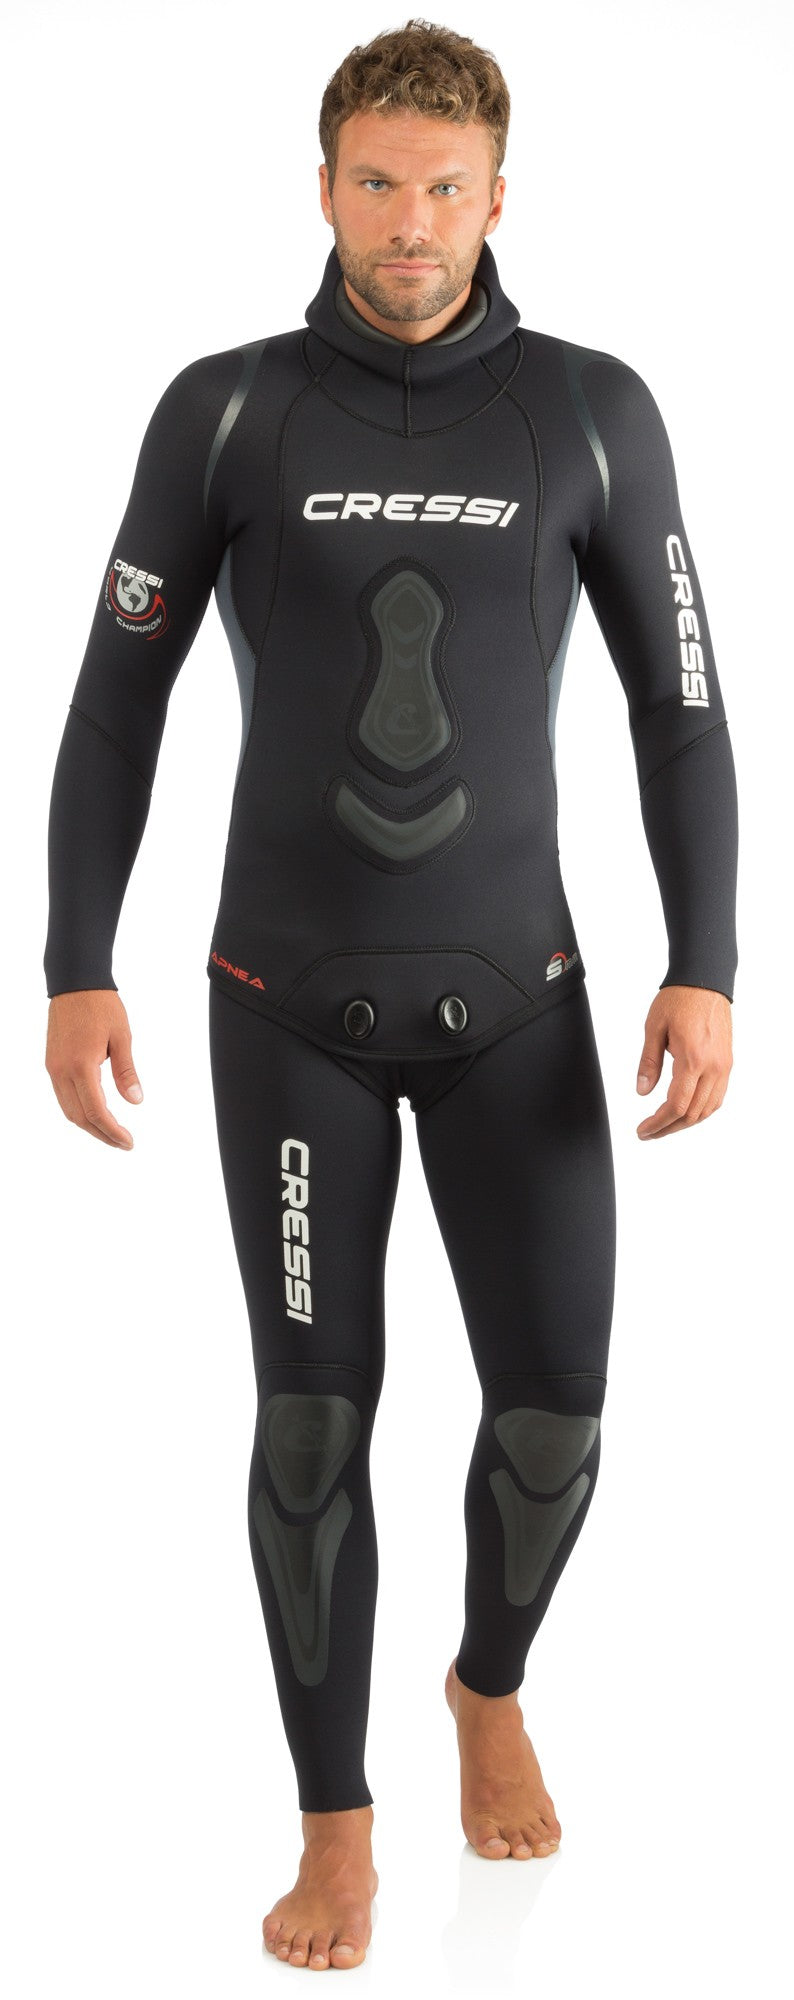 Freediving - 5~7 mm Wetsuit - Spearfishing Experts